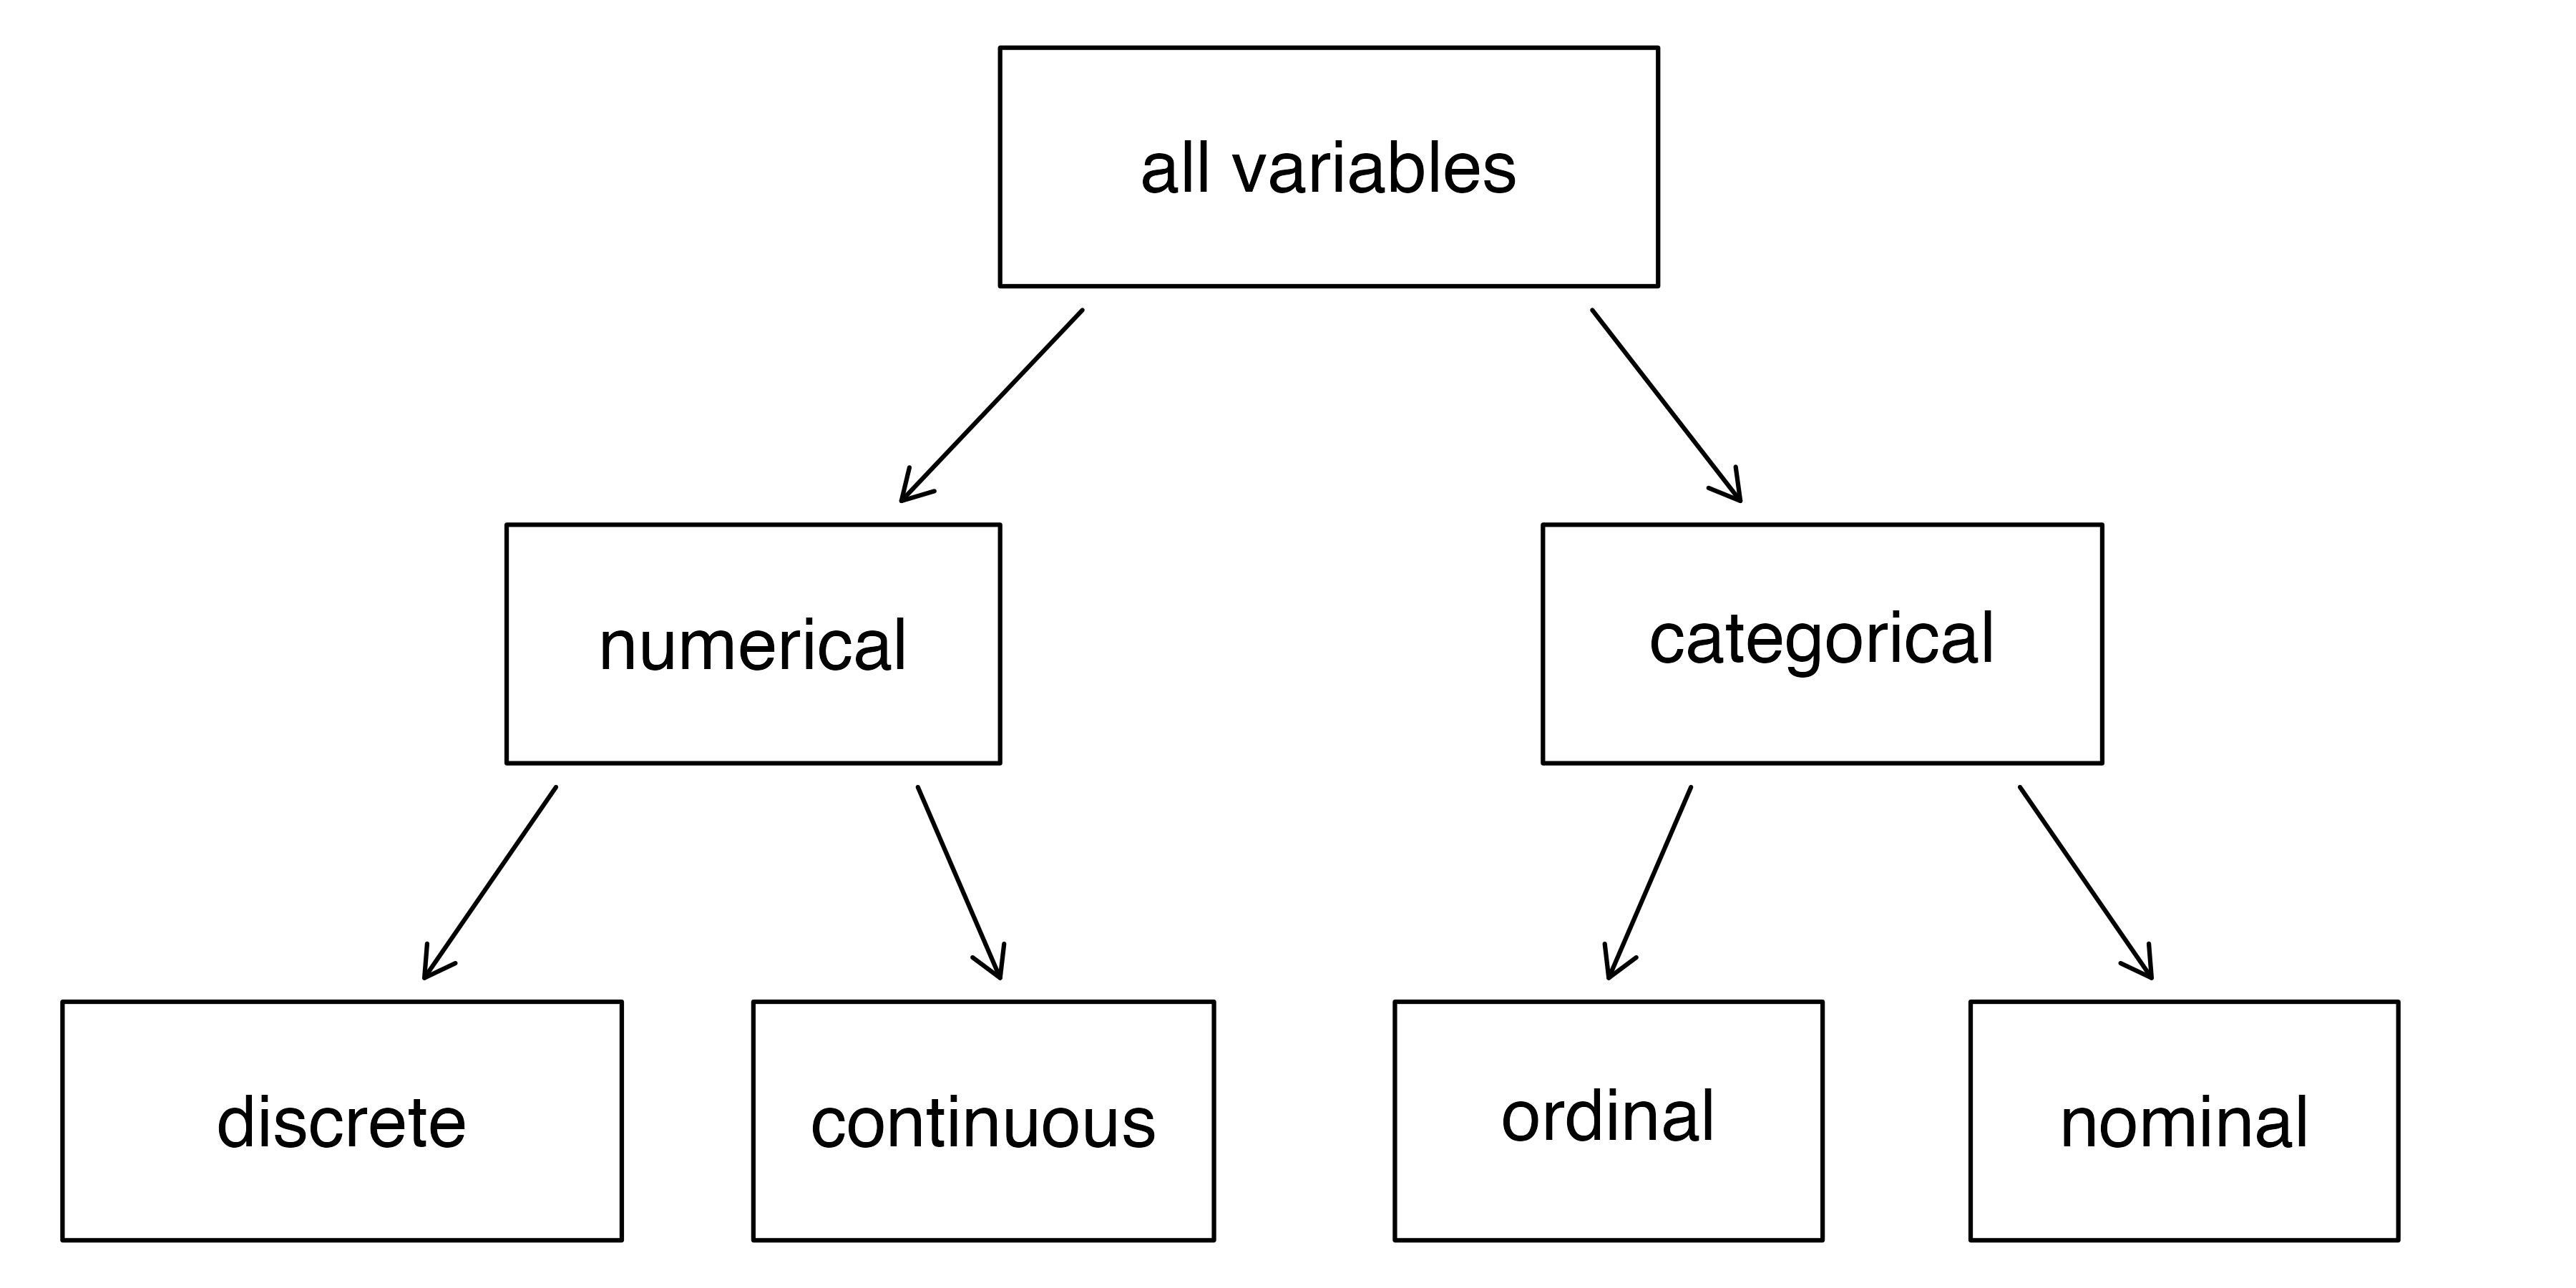 Types of variables are broken down into numerical (which can be discrete or continuous) and categorical (which can be ordinal or nominal).